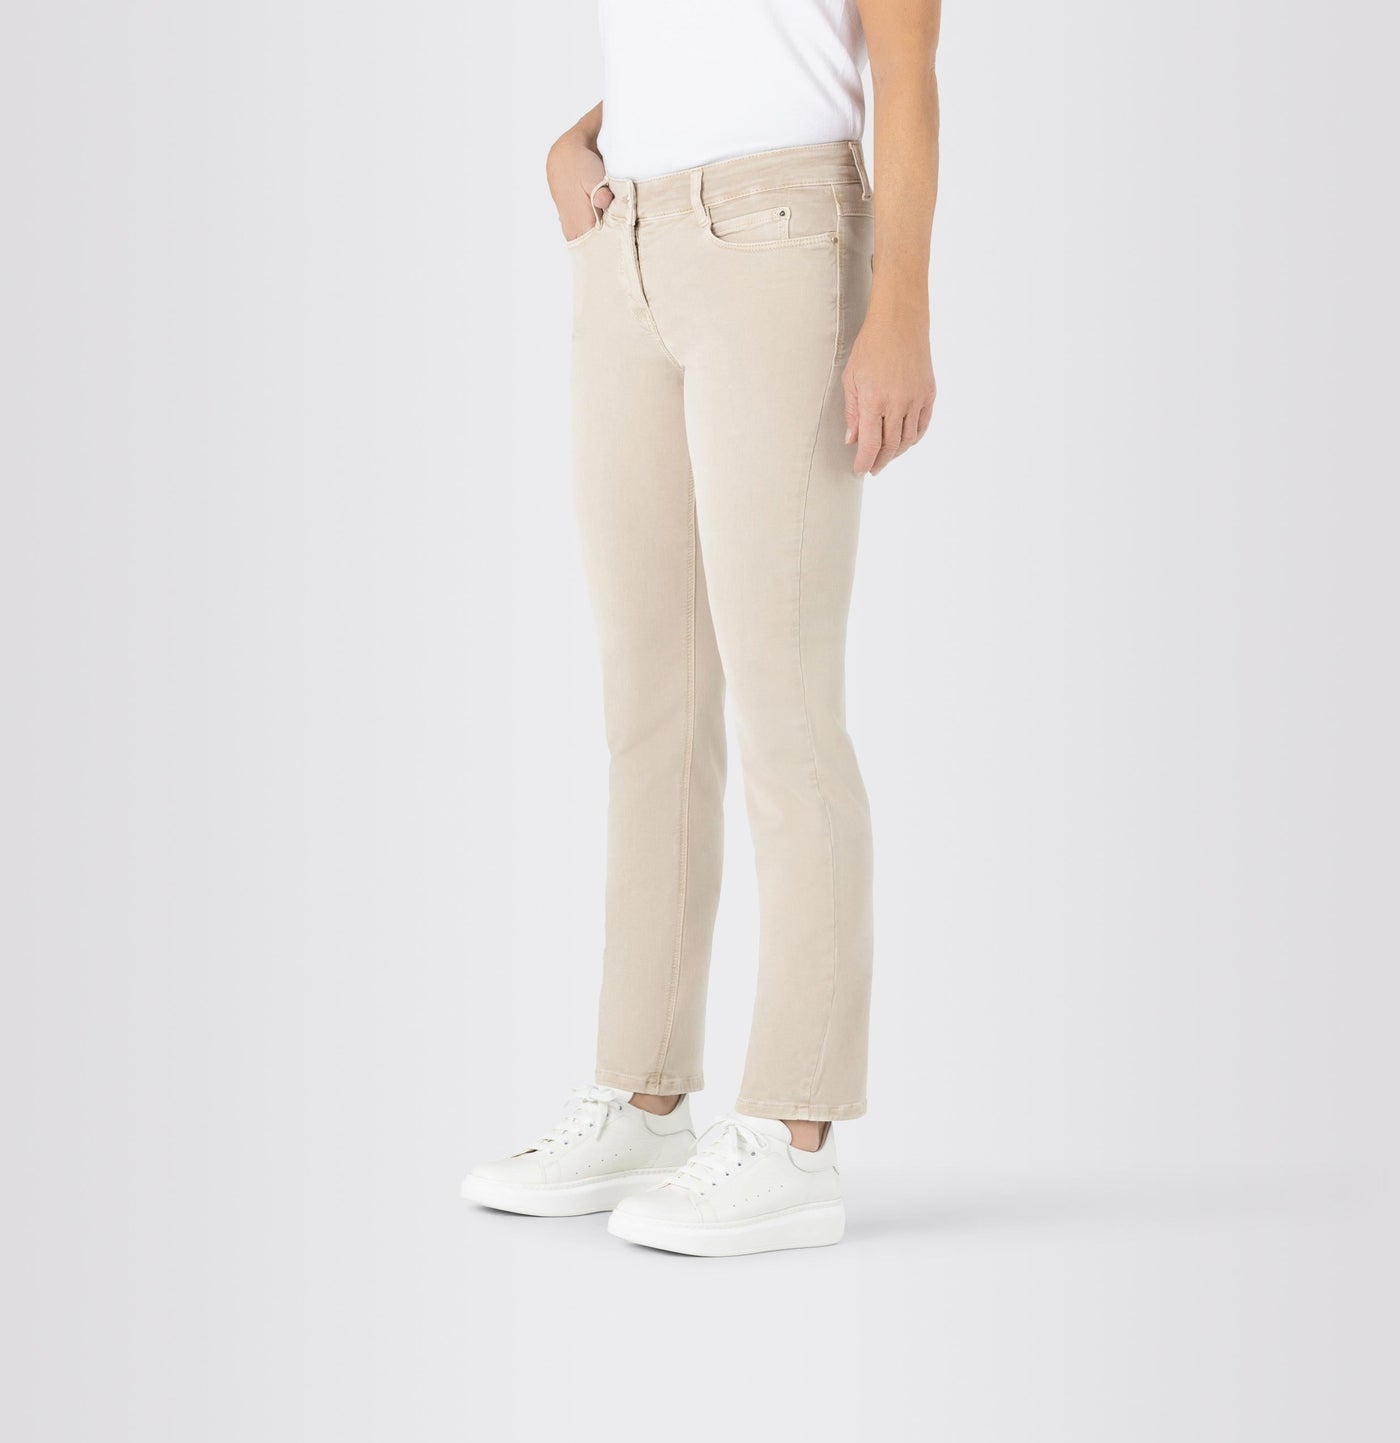 Dream Jean Smoothly Beige Color 214W 30" Inseam